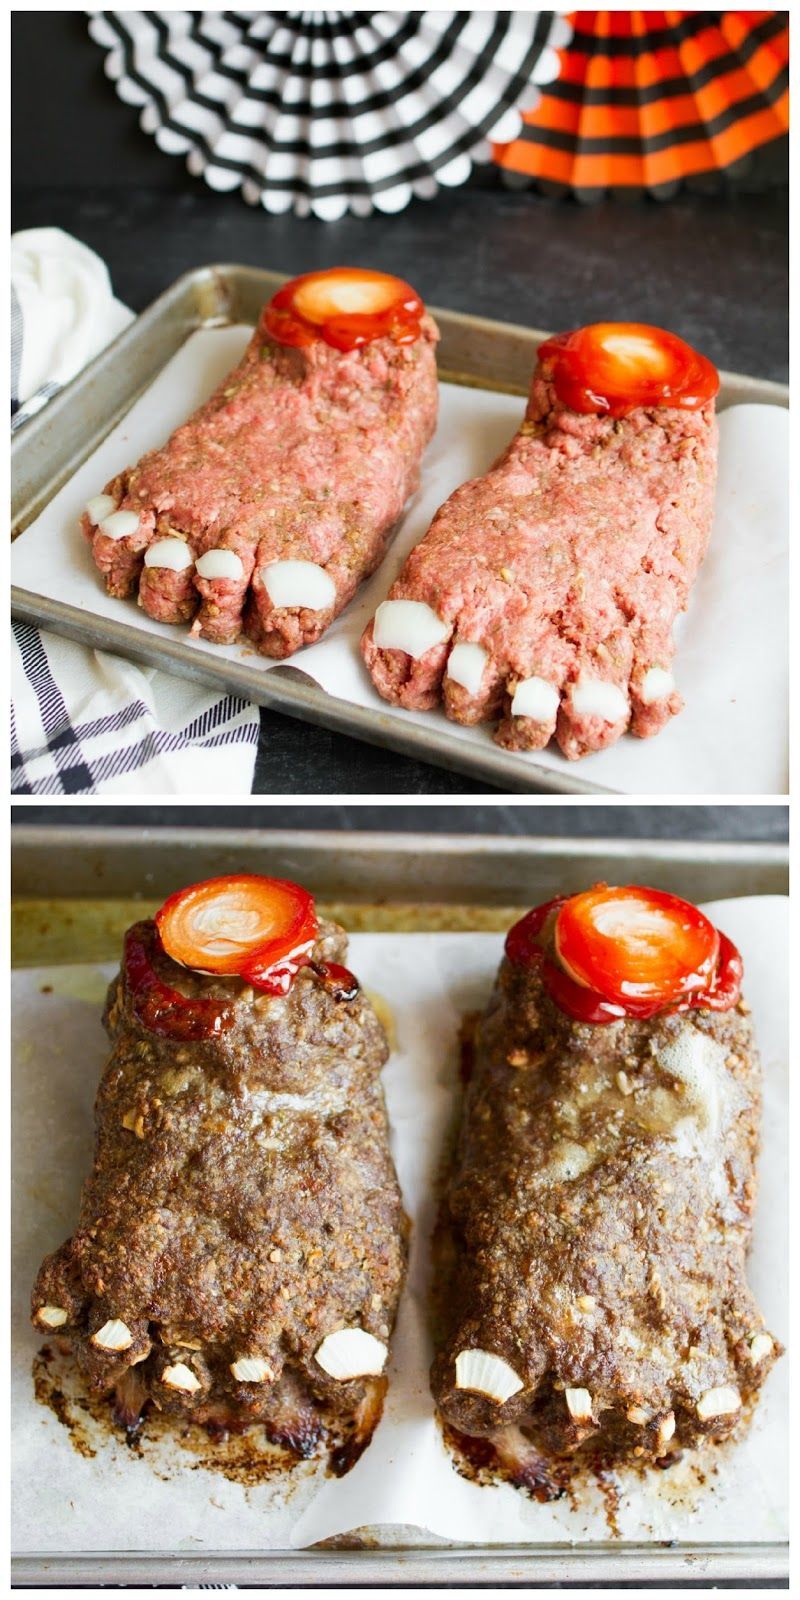 This is such a totally gross and completely cool way to serve meat loaf at Hallowe